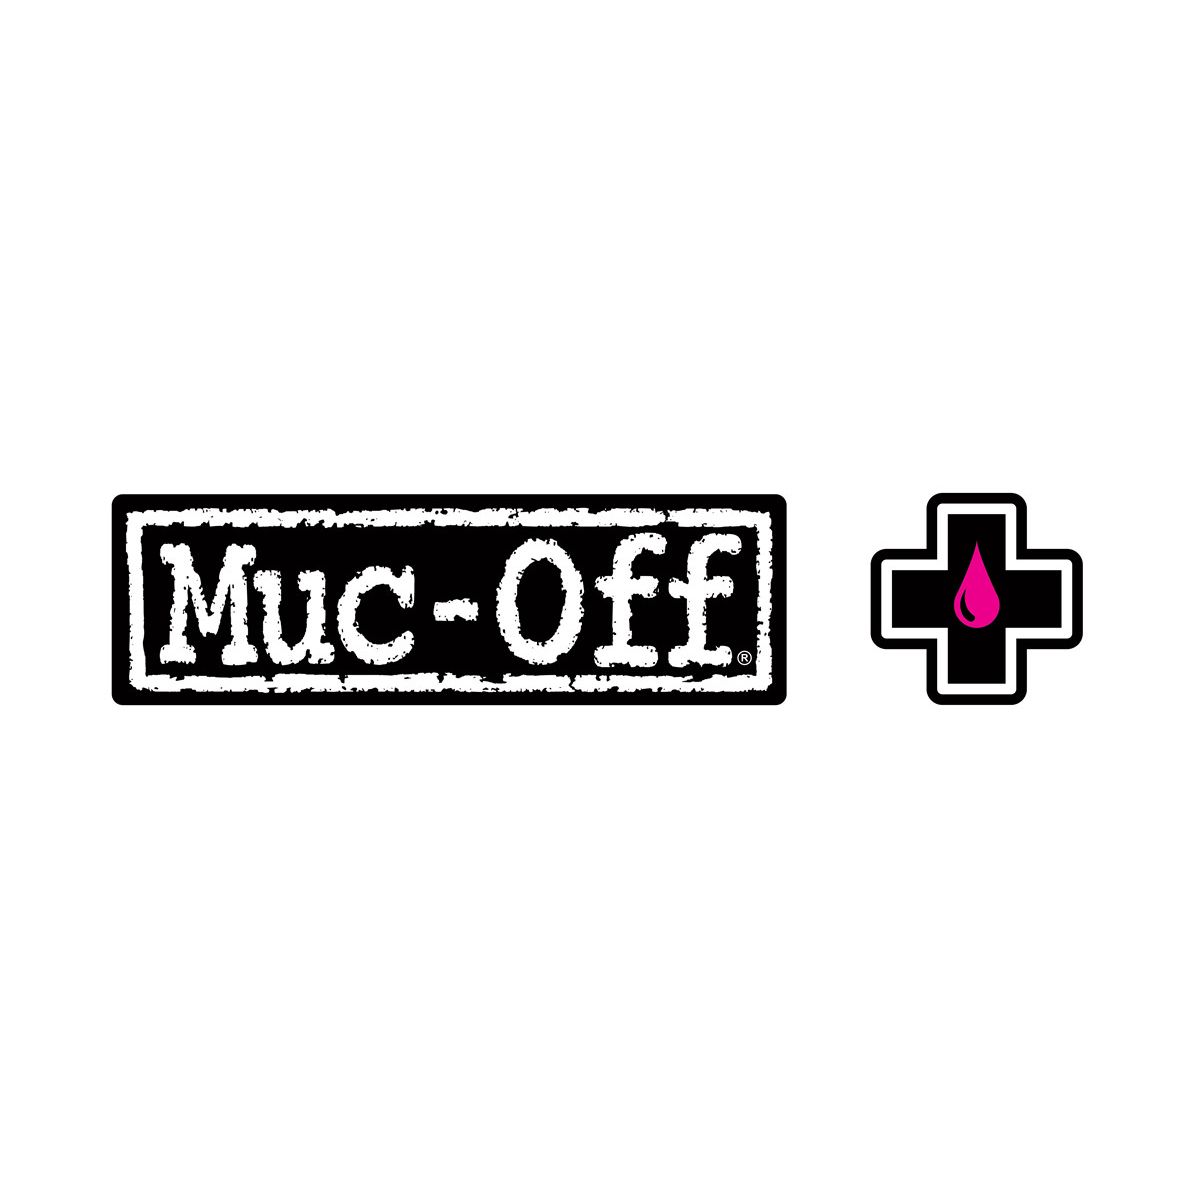 Kit Muc-Off Limpiador 1L + Spary Protector 500ml